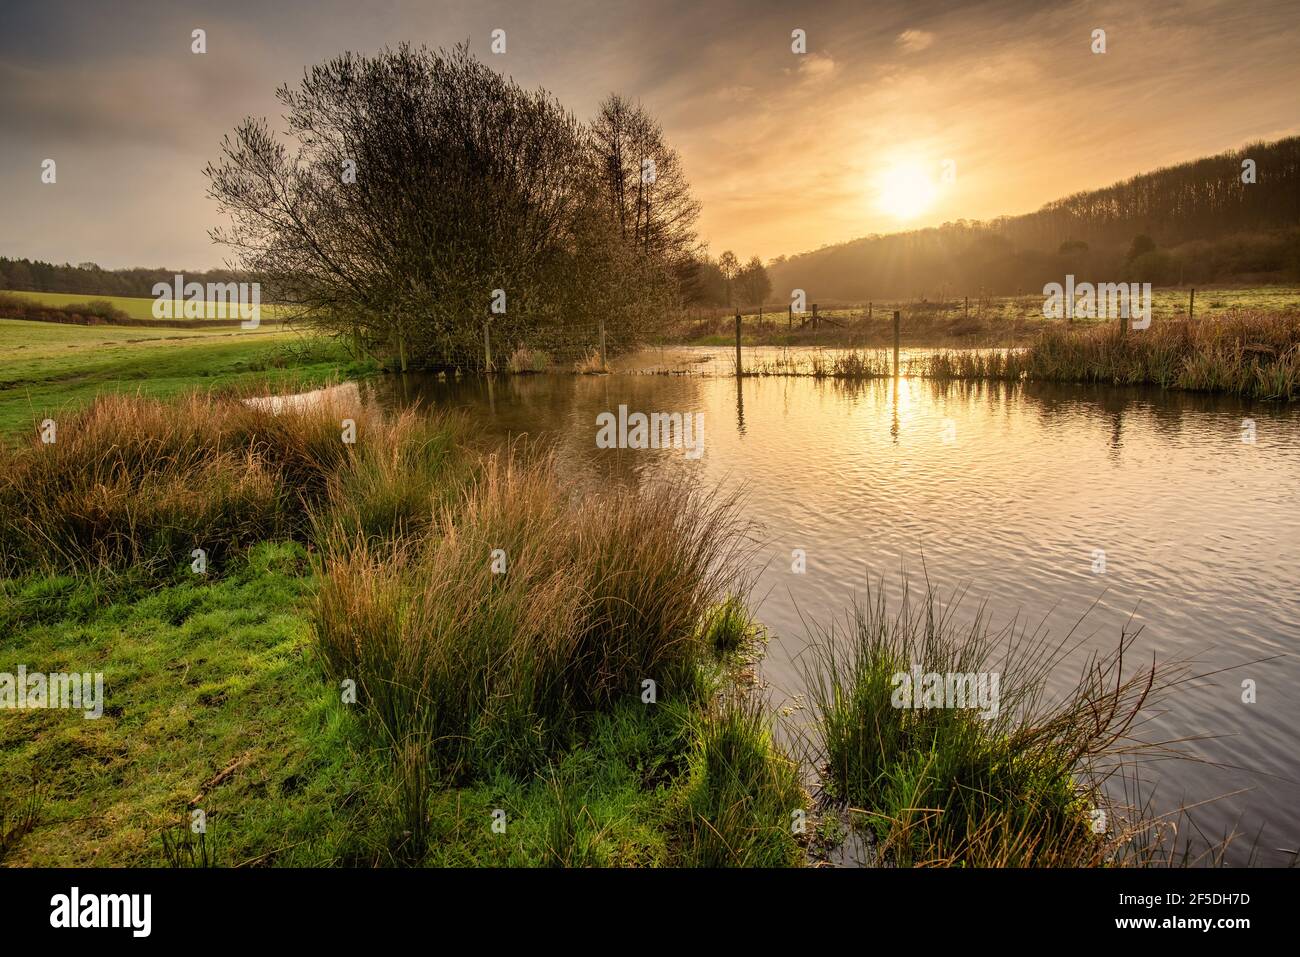 Sunrise over the River Chess in Latimer near Chesham, The Chilterns AONB, England Stock Photo